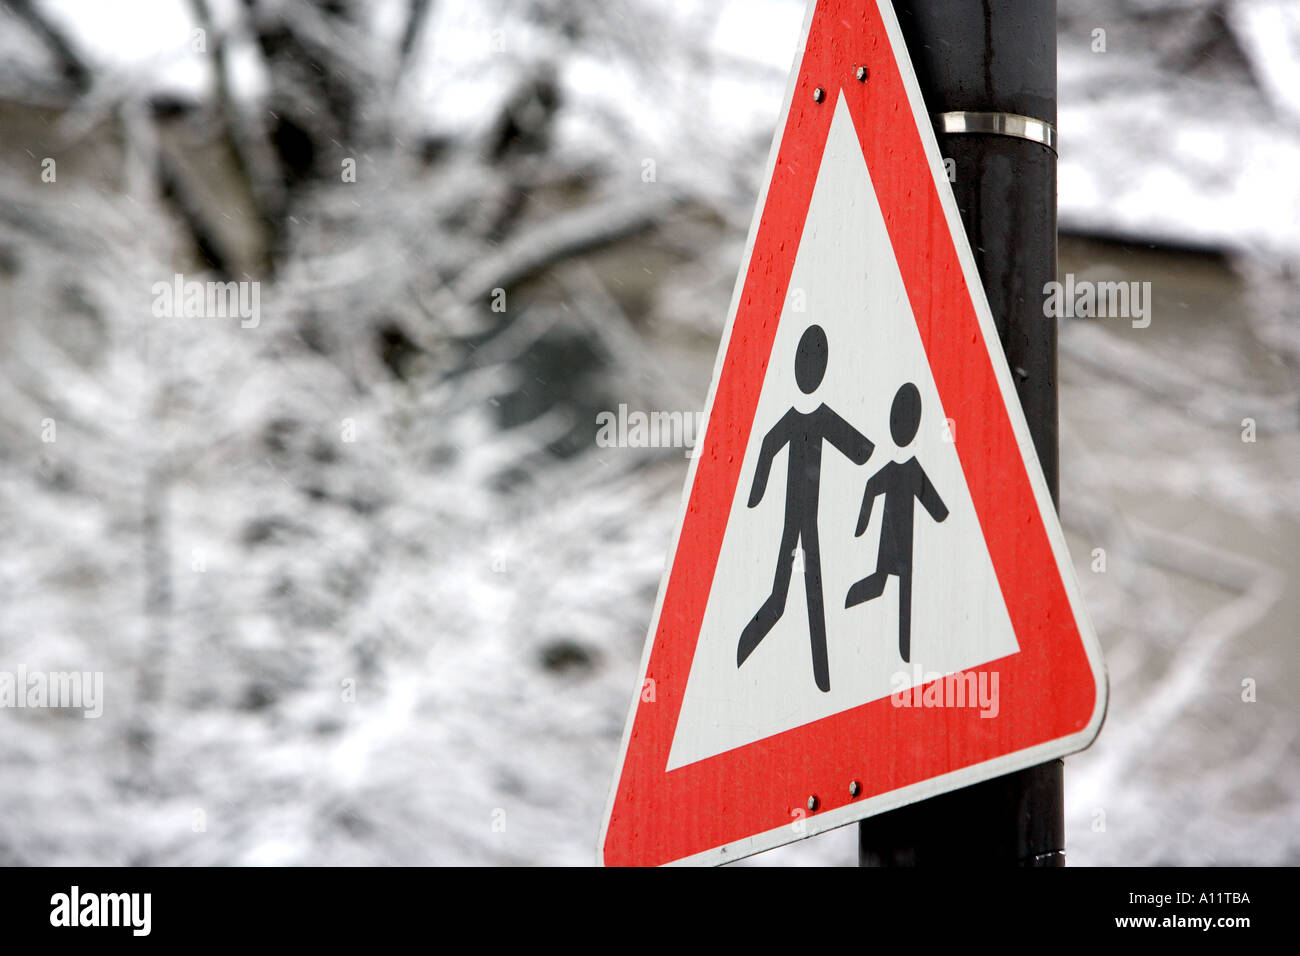 Children crossing warning sign in Germany Stock Photo